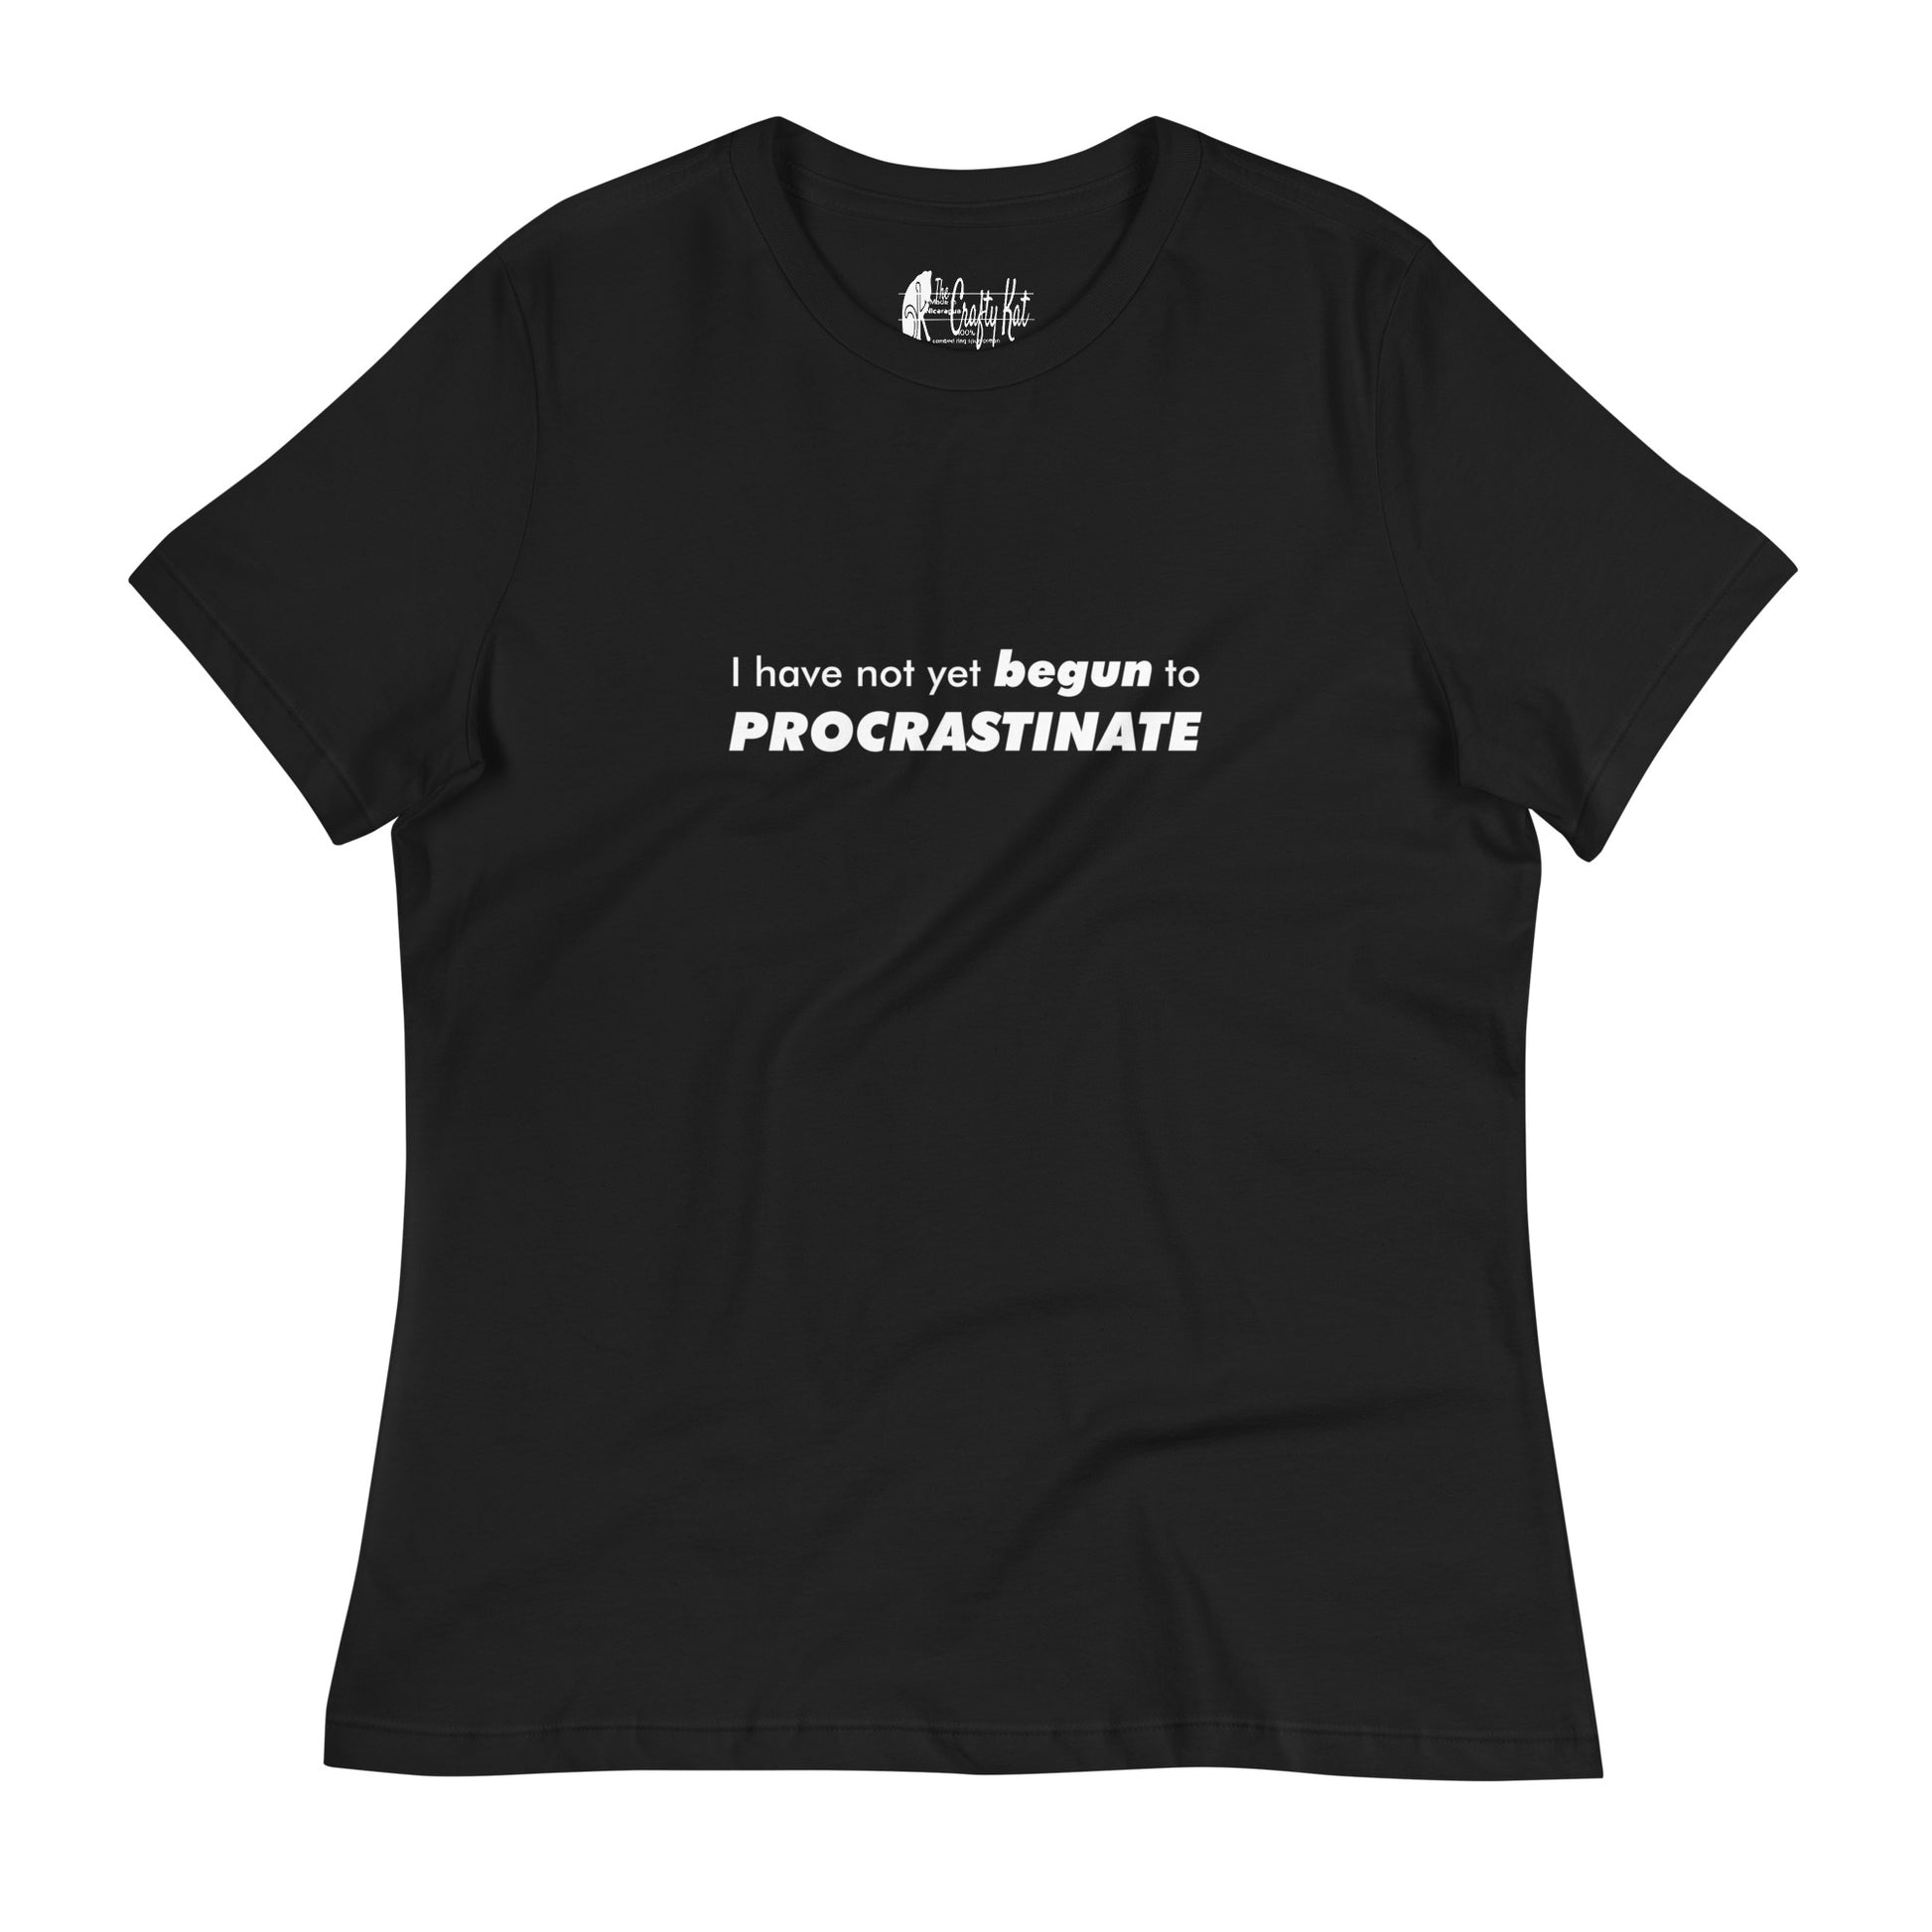 Black women's relaxed-fit t-shirt with text graphic: "I have not yet BEGUN to PROCRASTINATE"